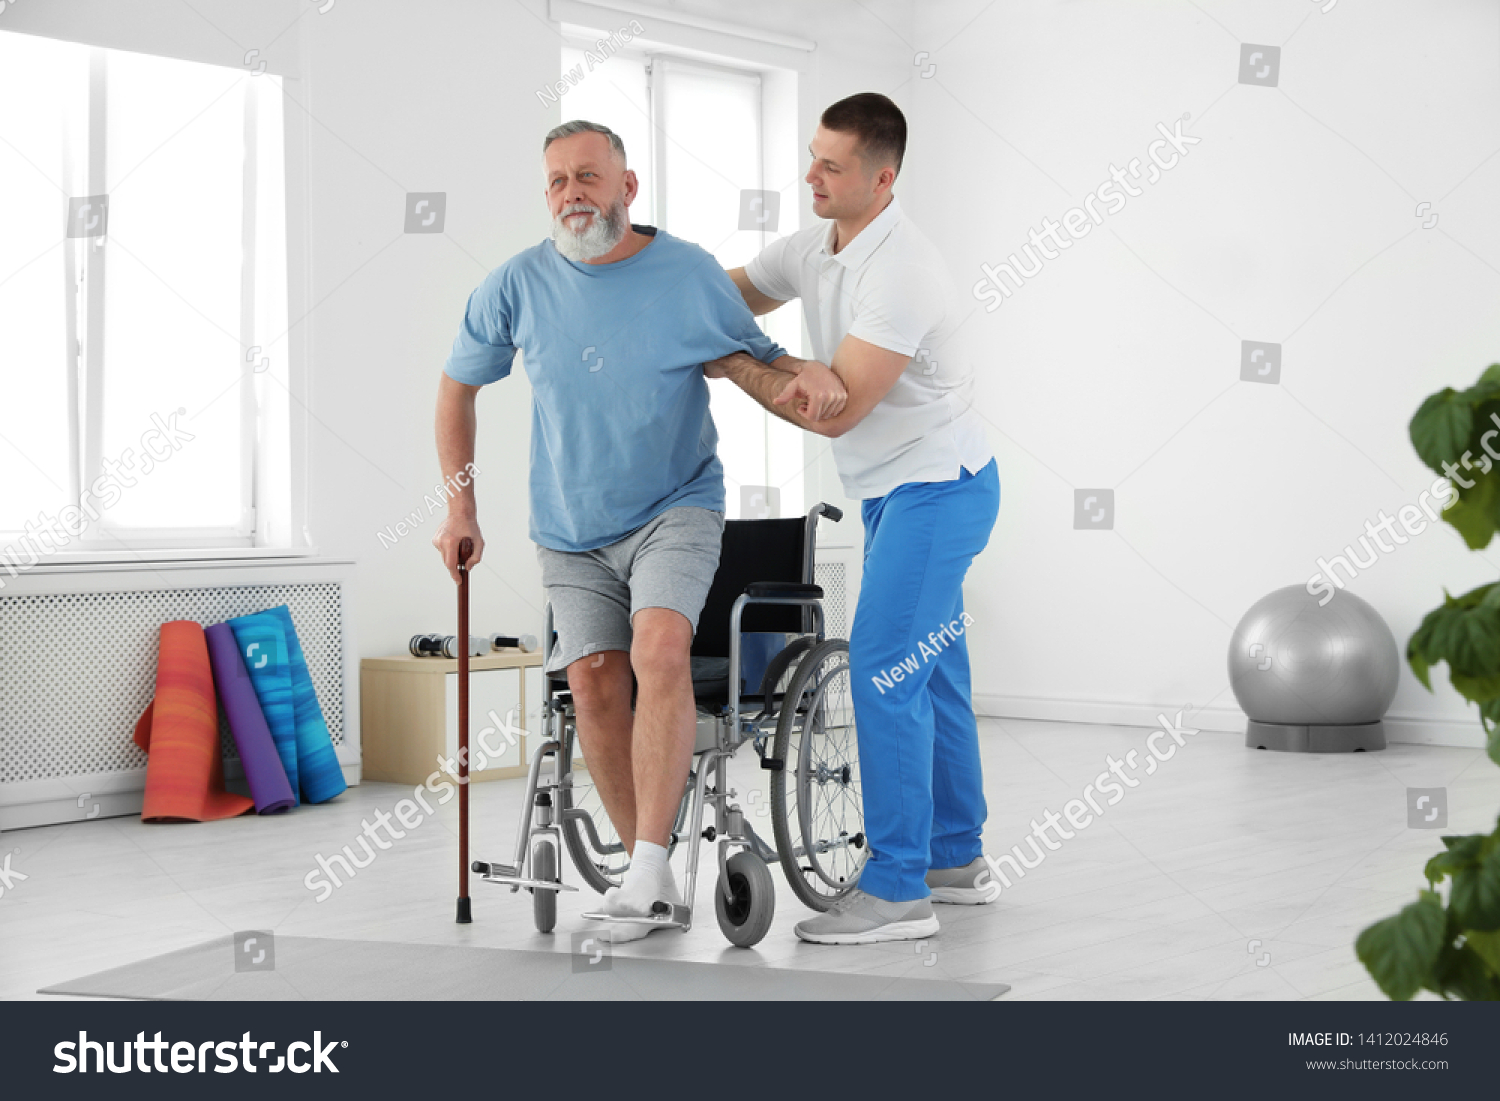 Professional physiotherapist working with senior patient in rehabilitation center #1412024846